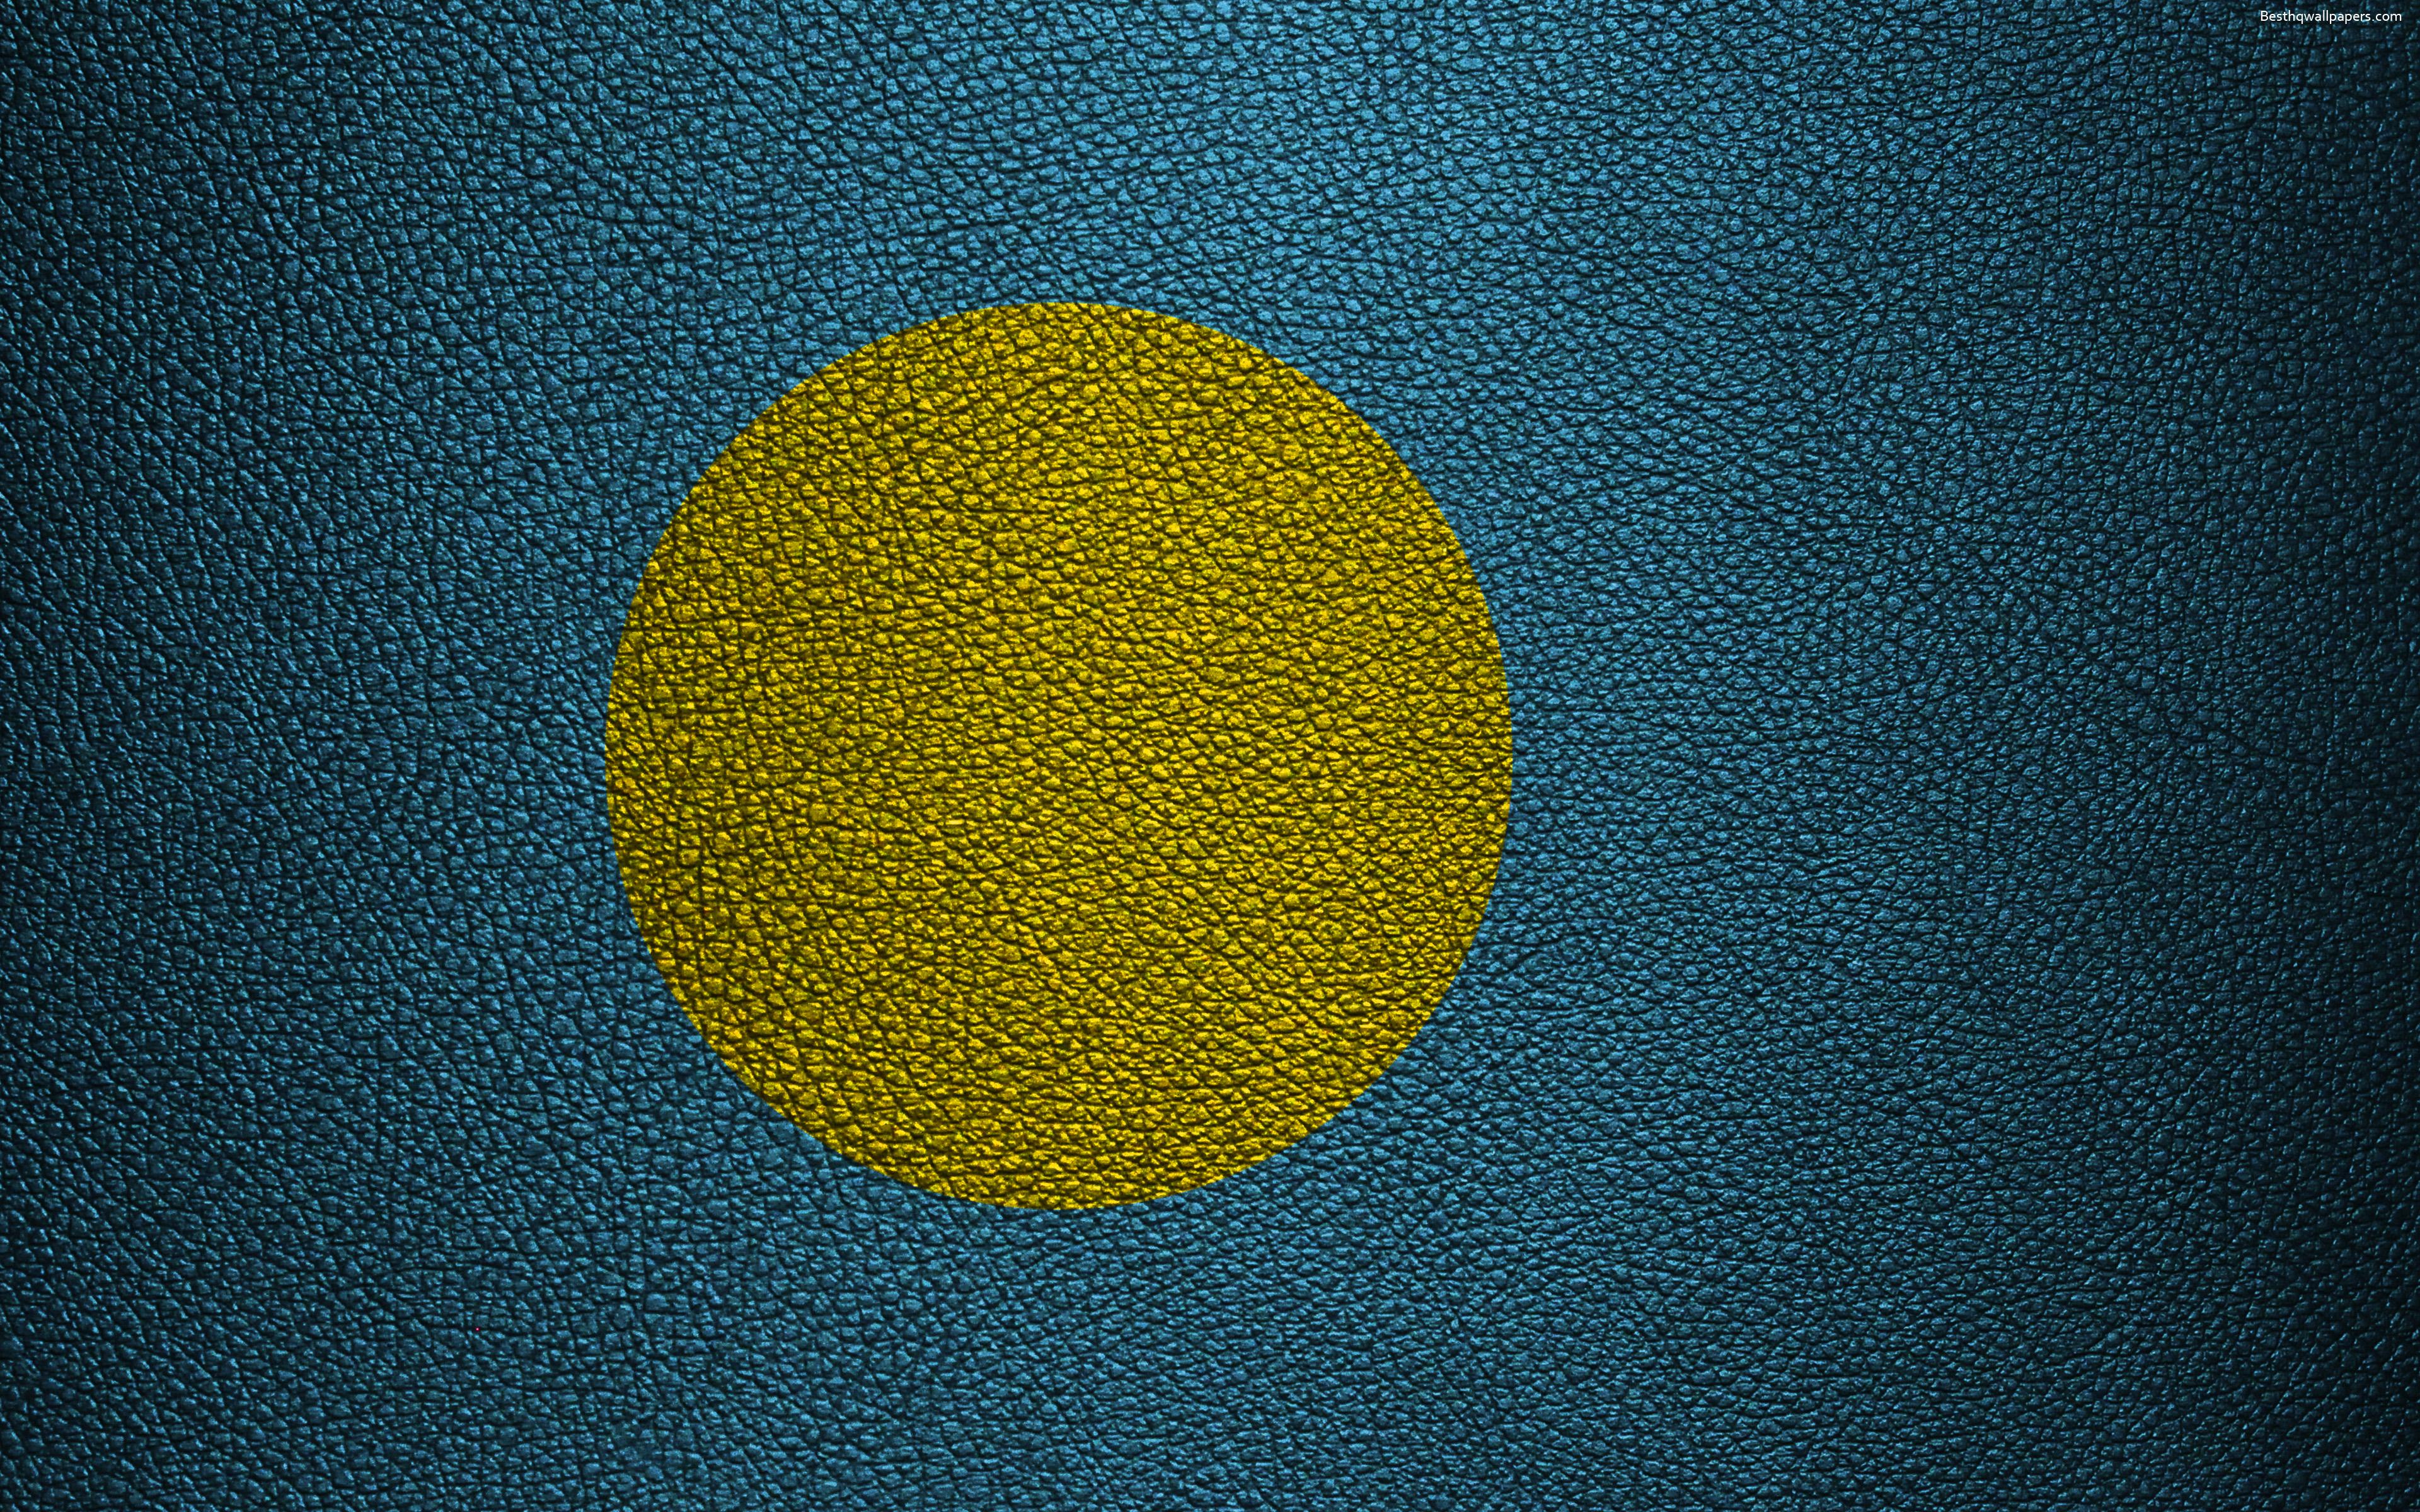 Download wallpaper Flag of Palau, 4k, leather texture, Oceania